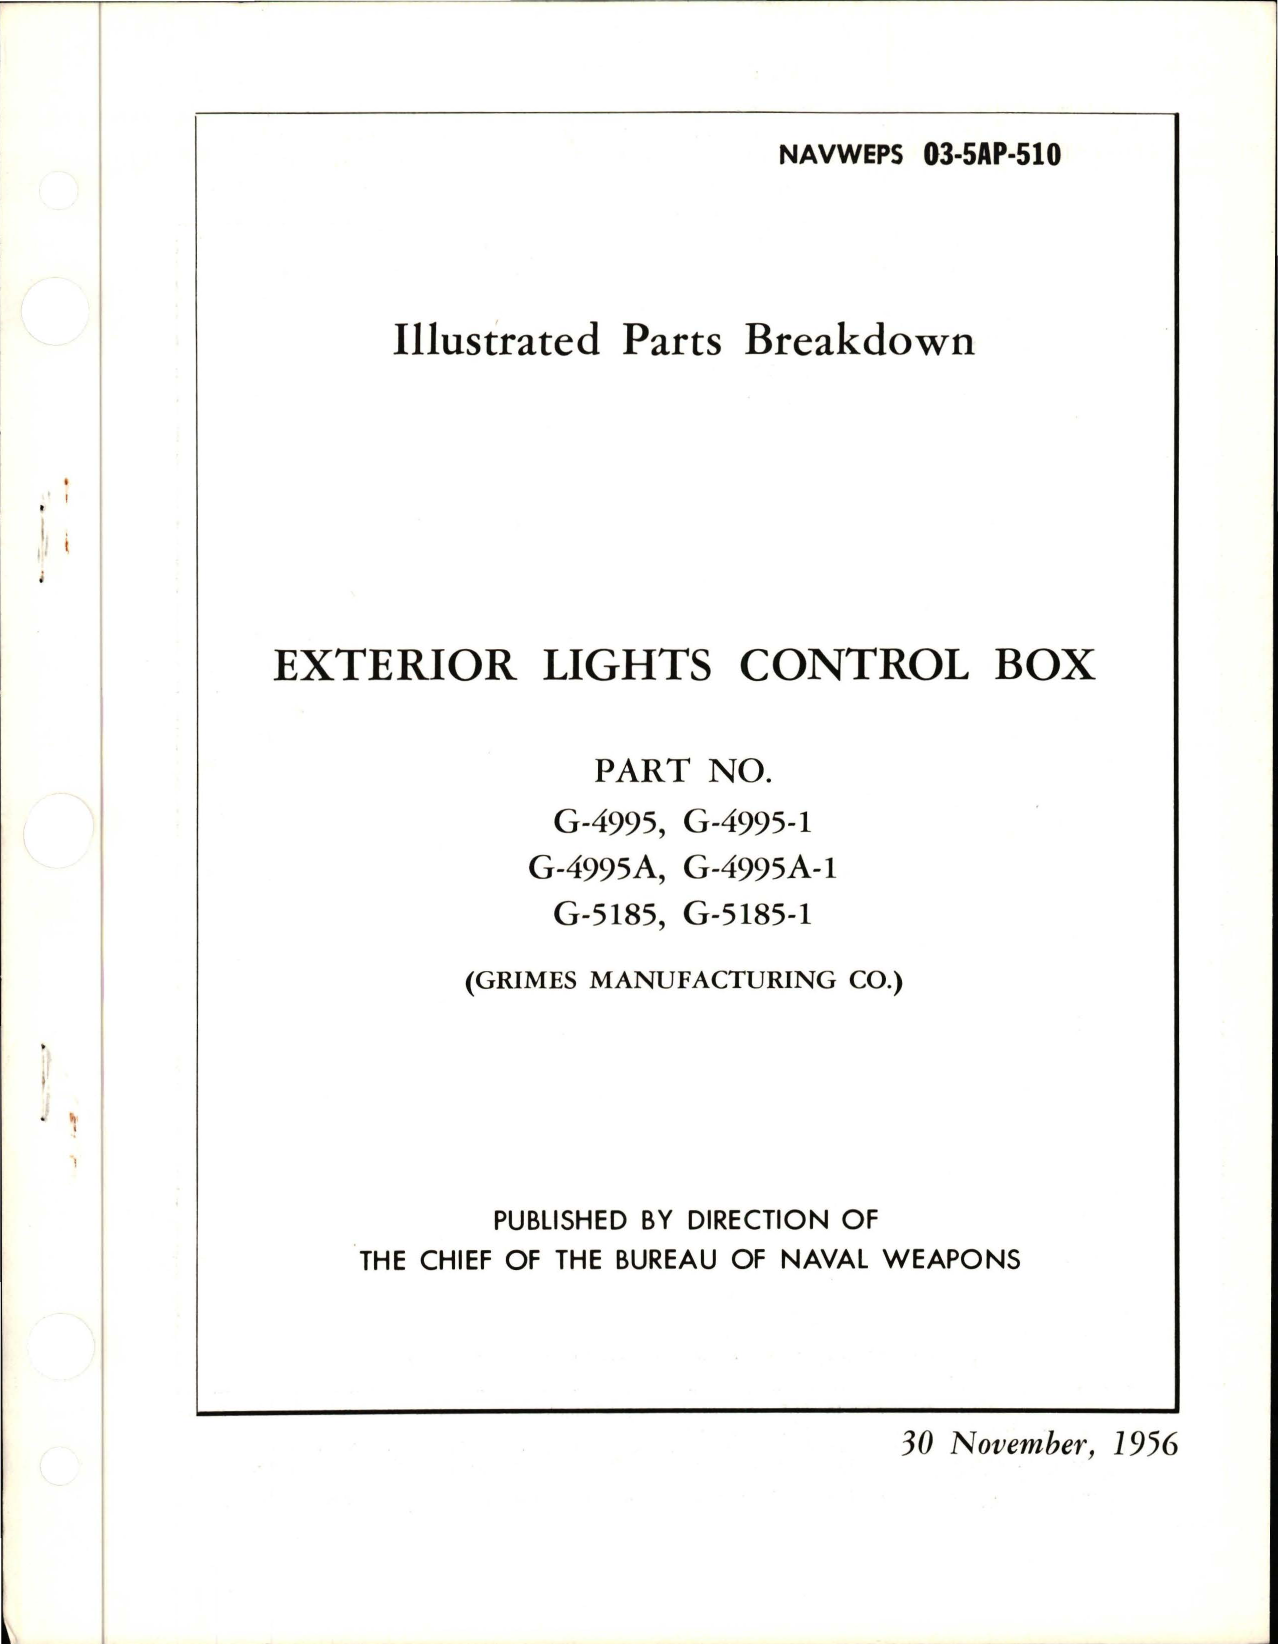 Sample page 1 from AirCorps Library document: Exterior Lights Control Box - Parts G-4995, G-4995-1, G-4995A, G-4995A-1, G-5185, and G5185-1